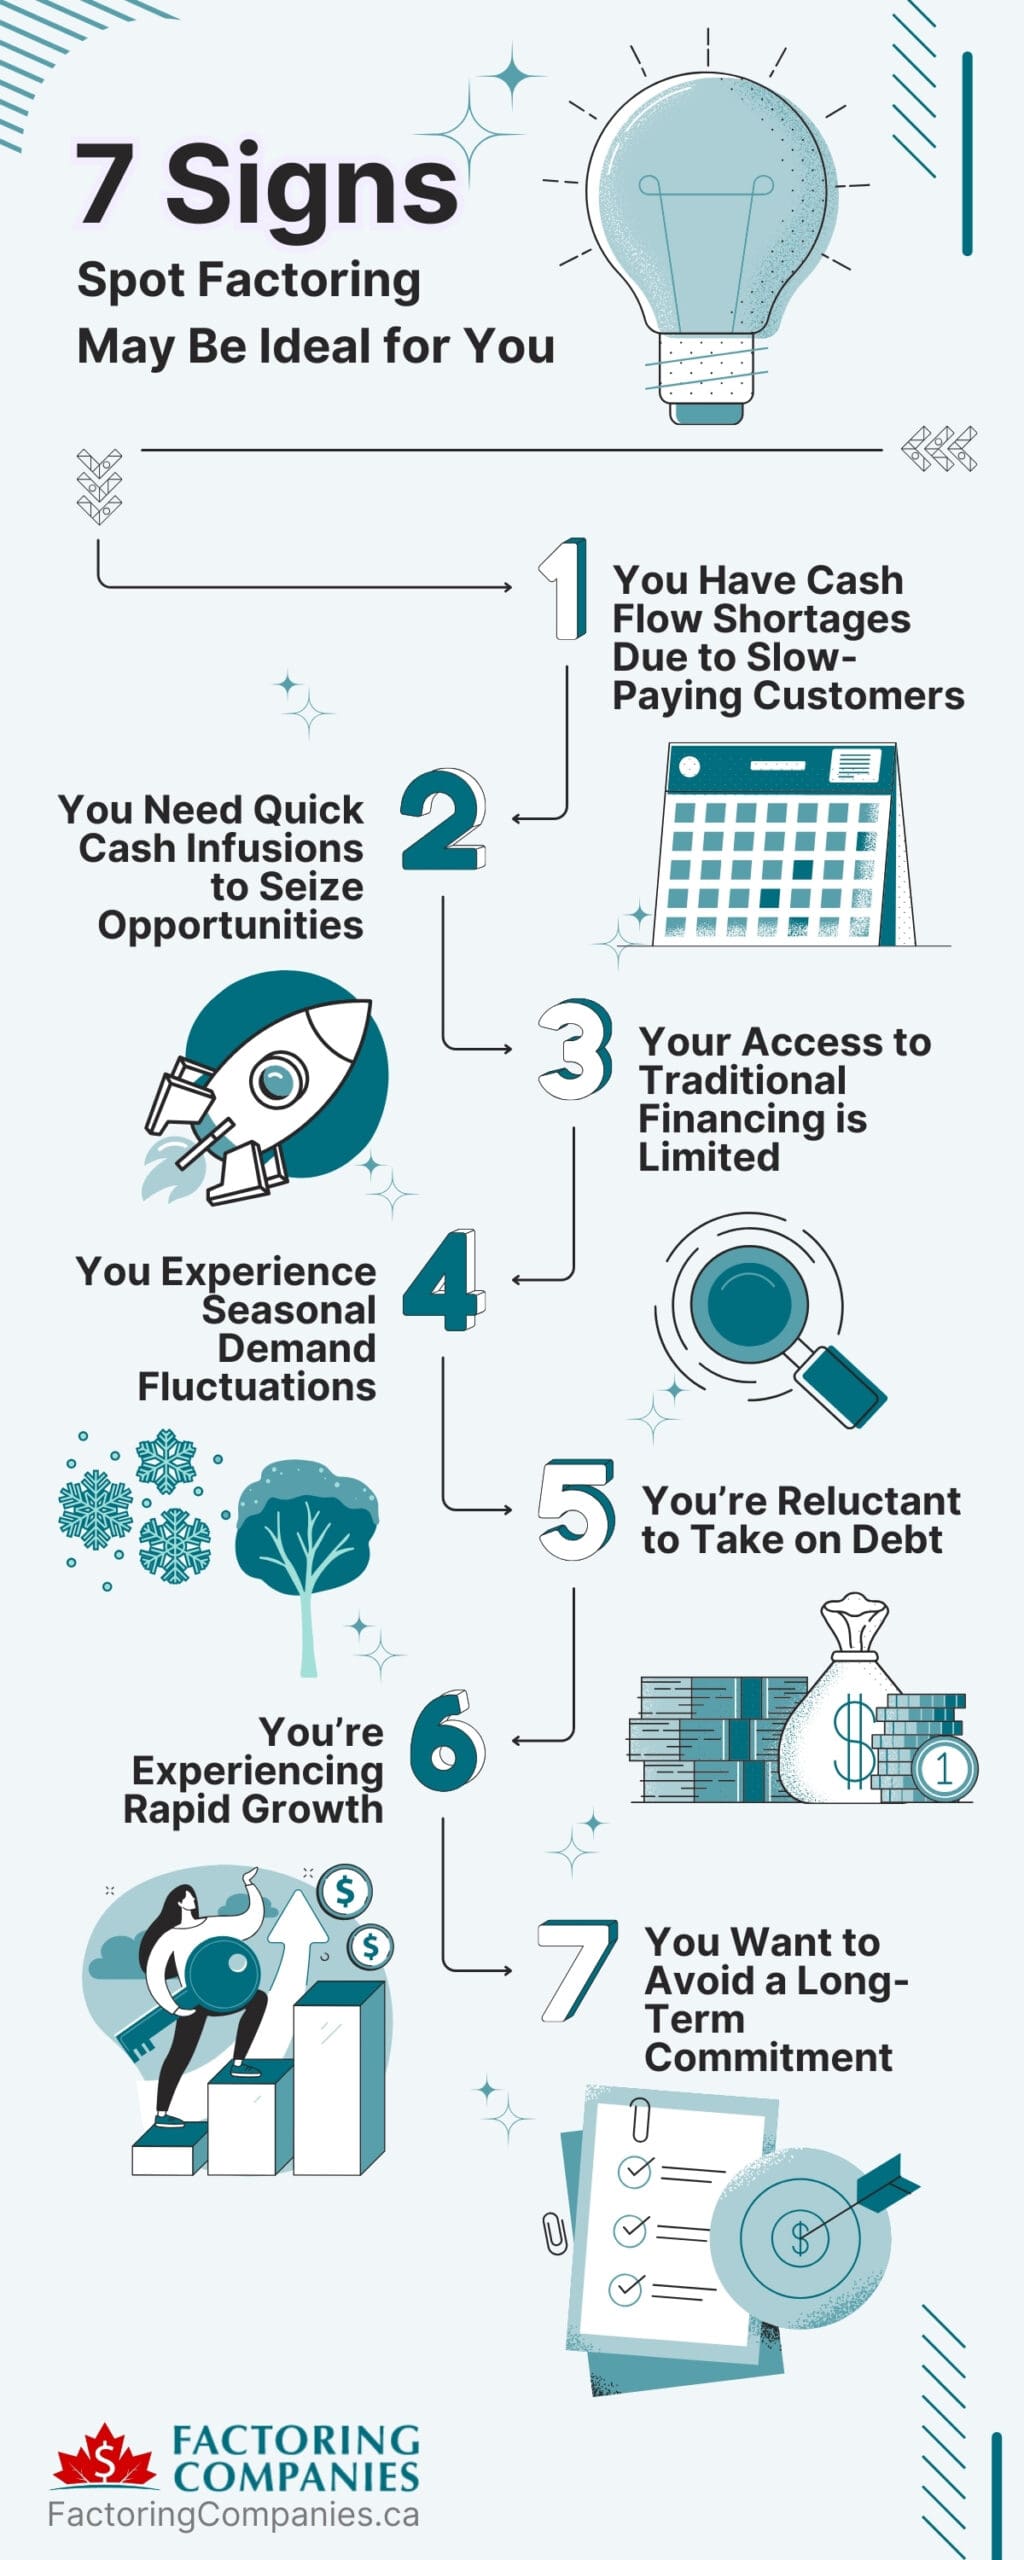 7 Signs Spot Factoring May Be Ideal for You